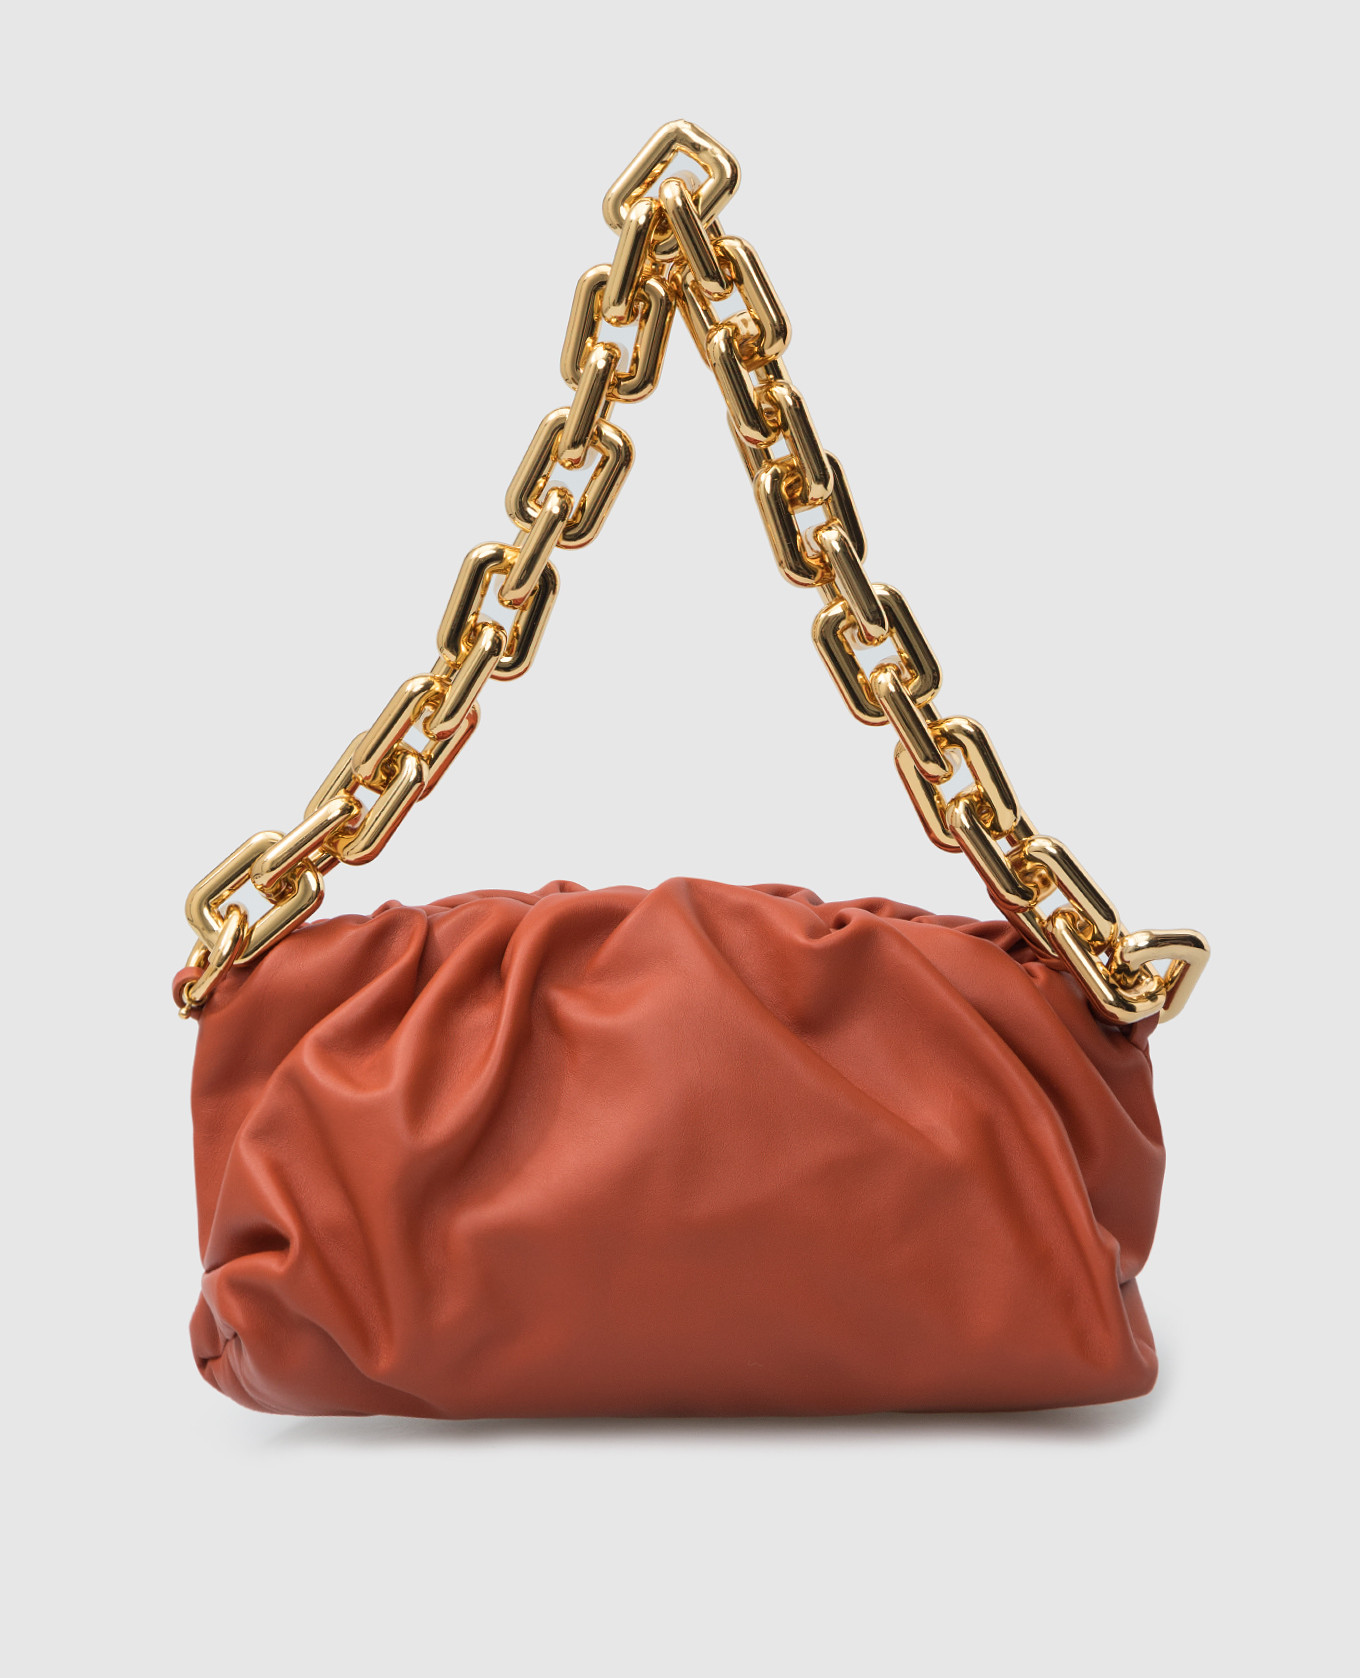 The Chain Pouch Terracotta Leather Bag